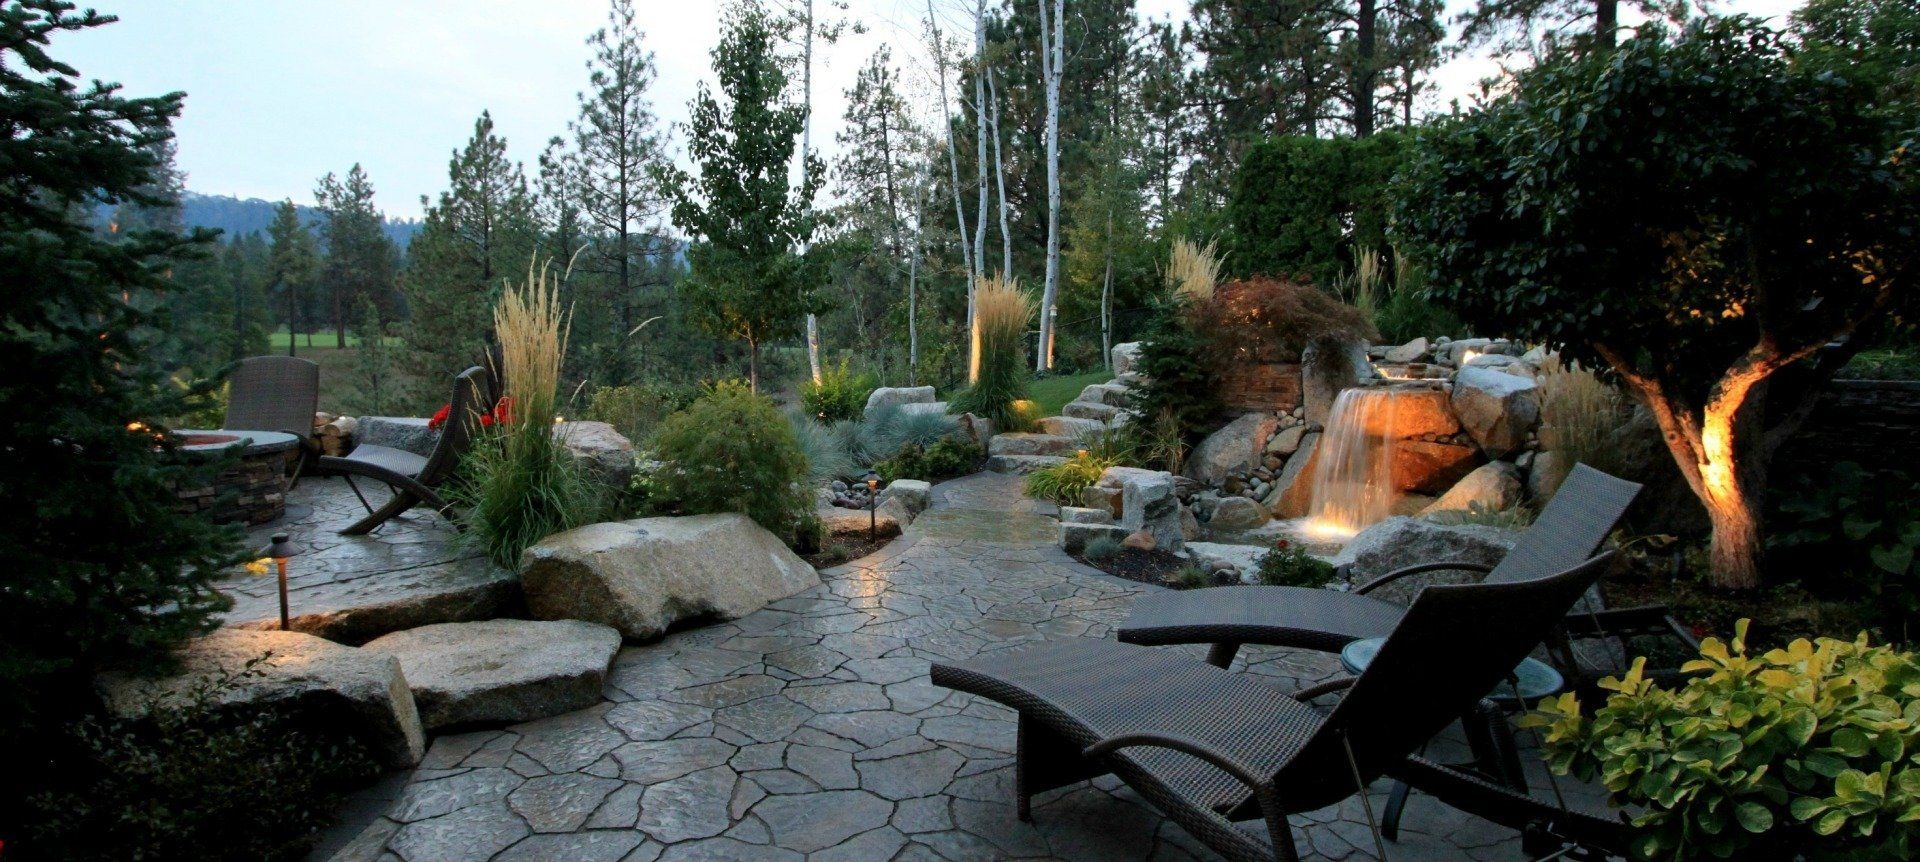 outdoor paver patio space with night lighting and water feature